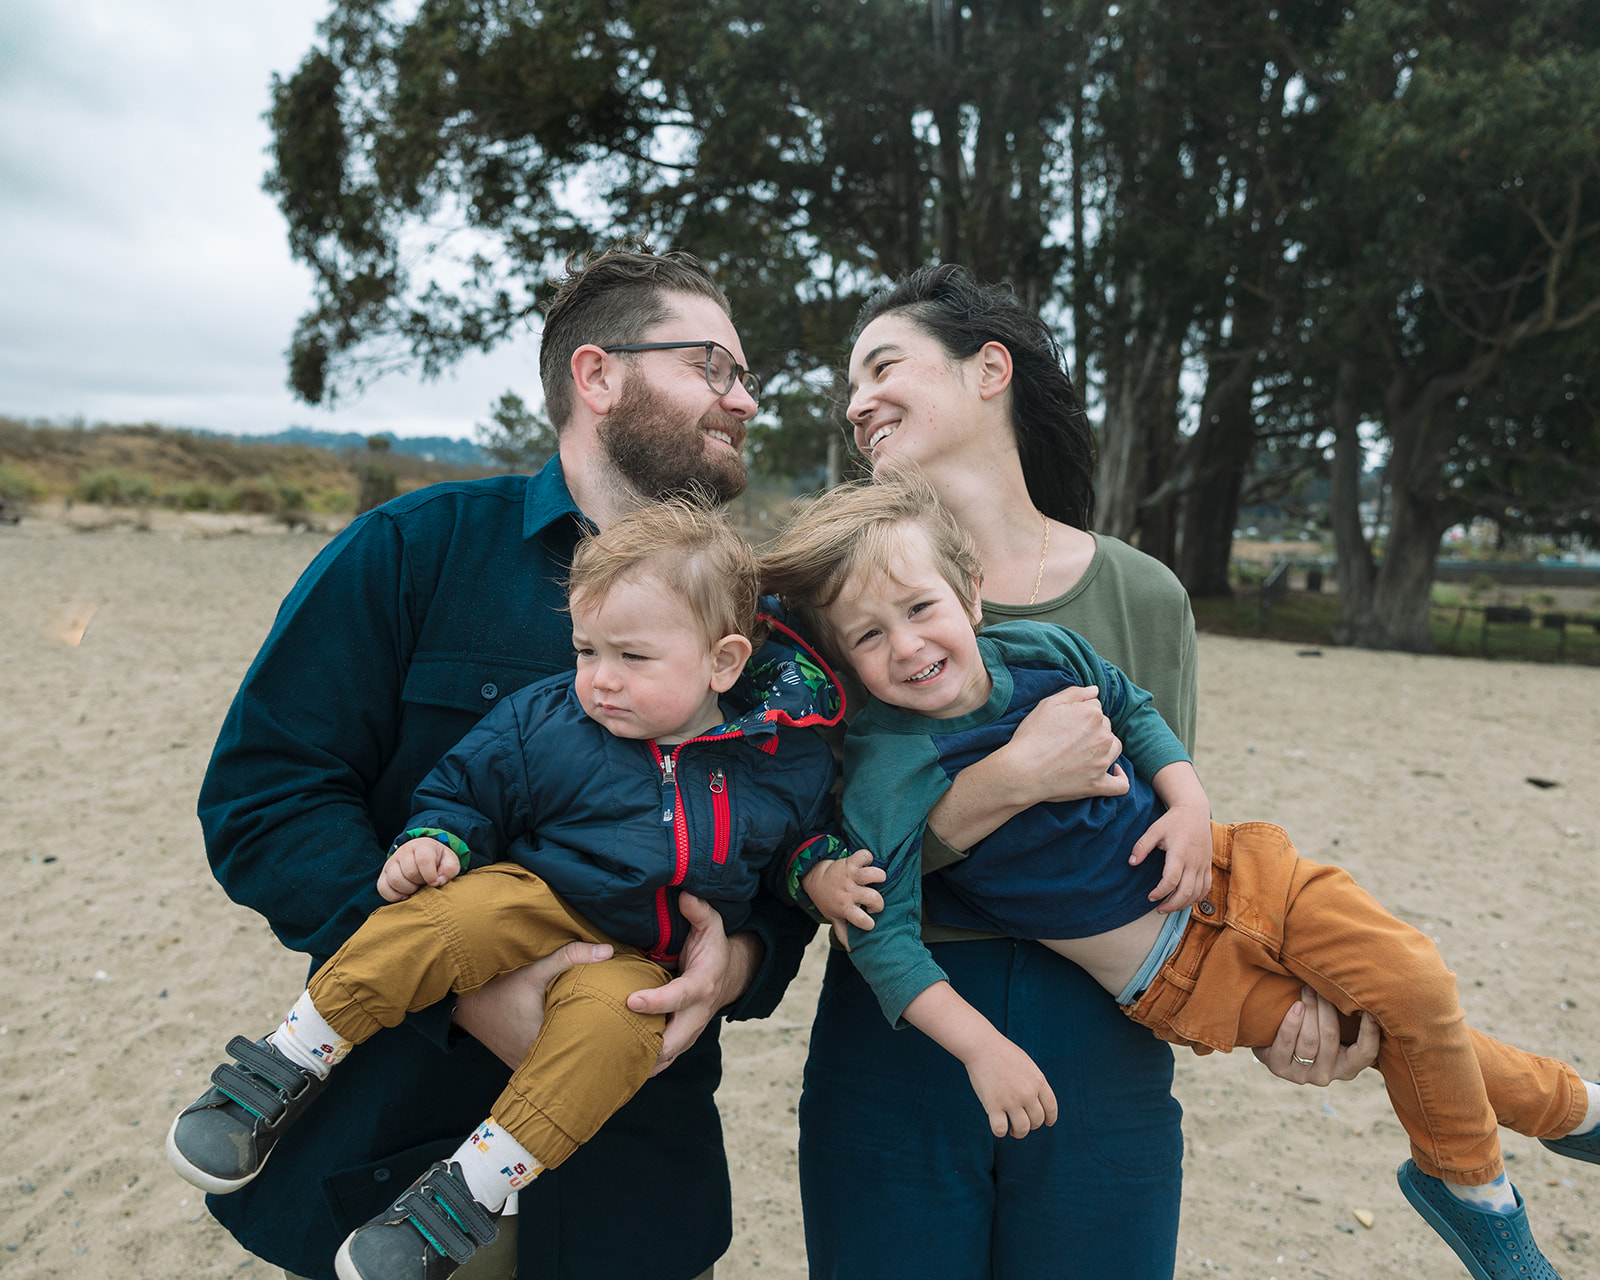 Family photoshoot at The Albany Bulb in Albany, CA by Laura Jaeger Bay Area Family Photographer